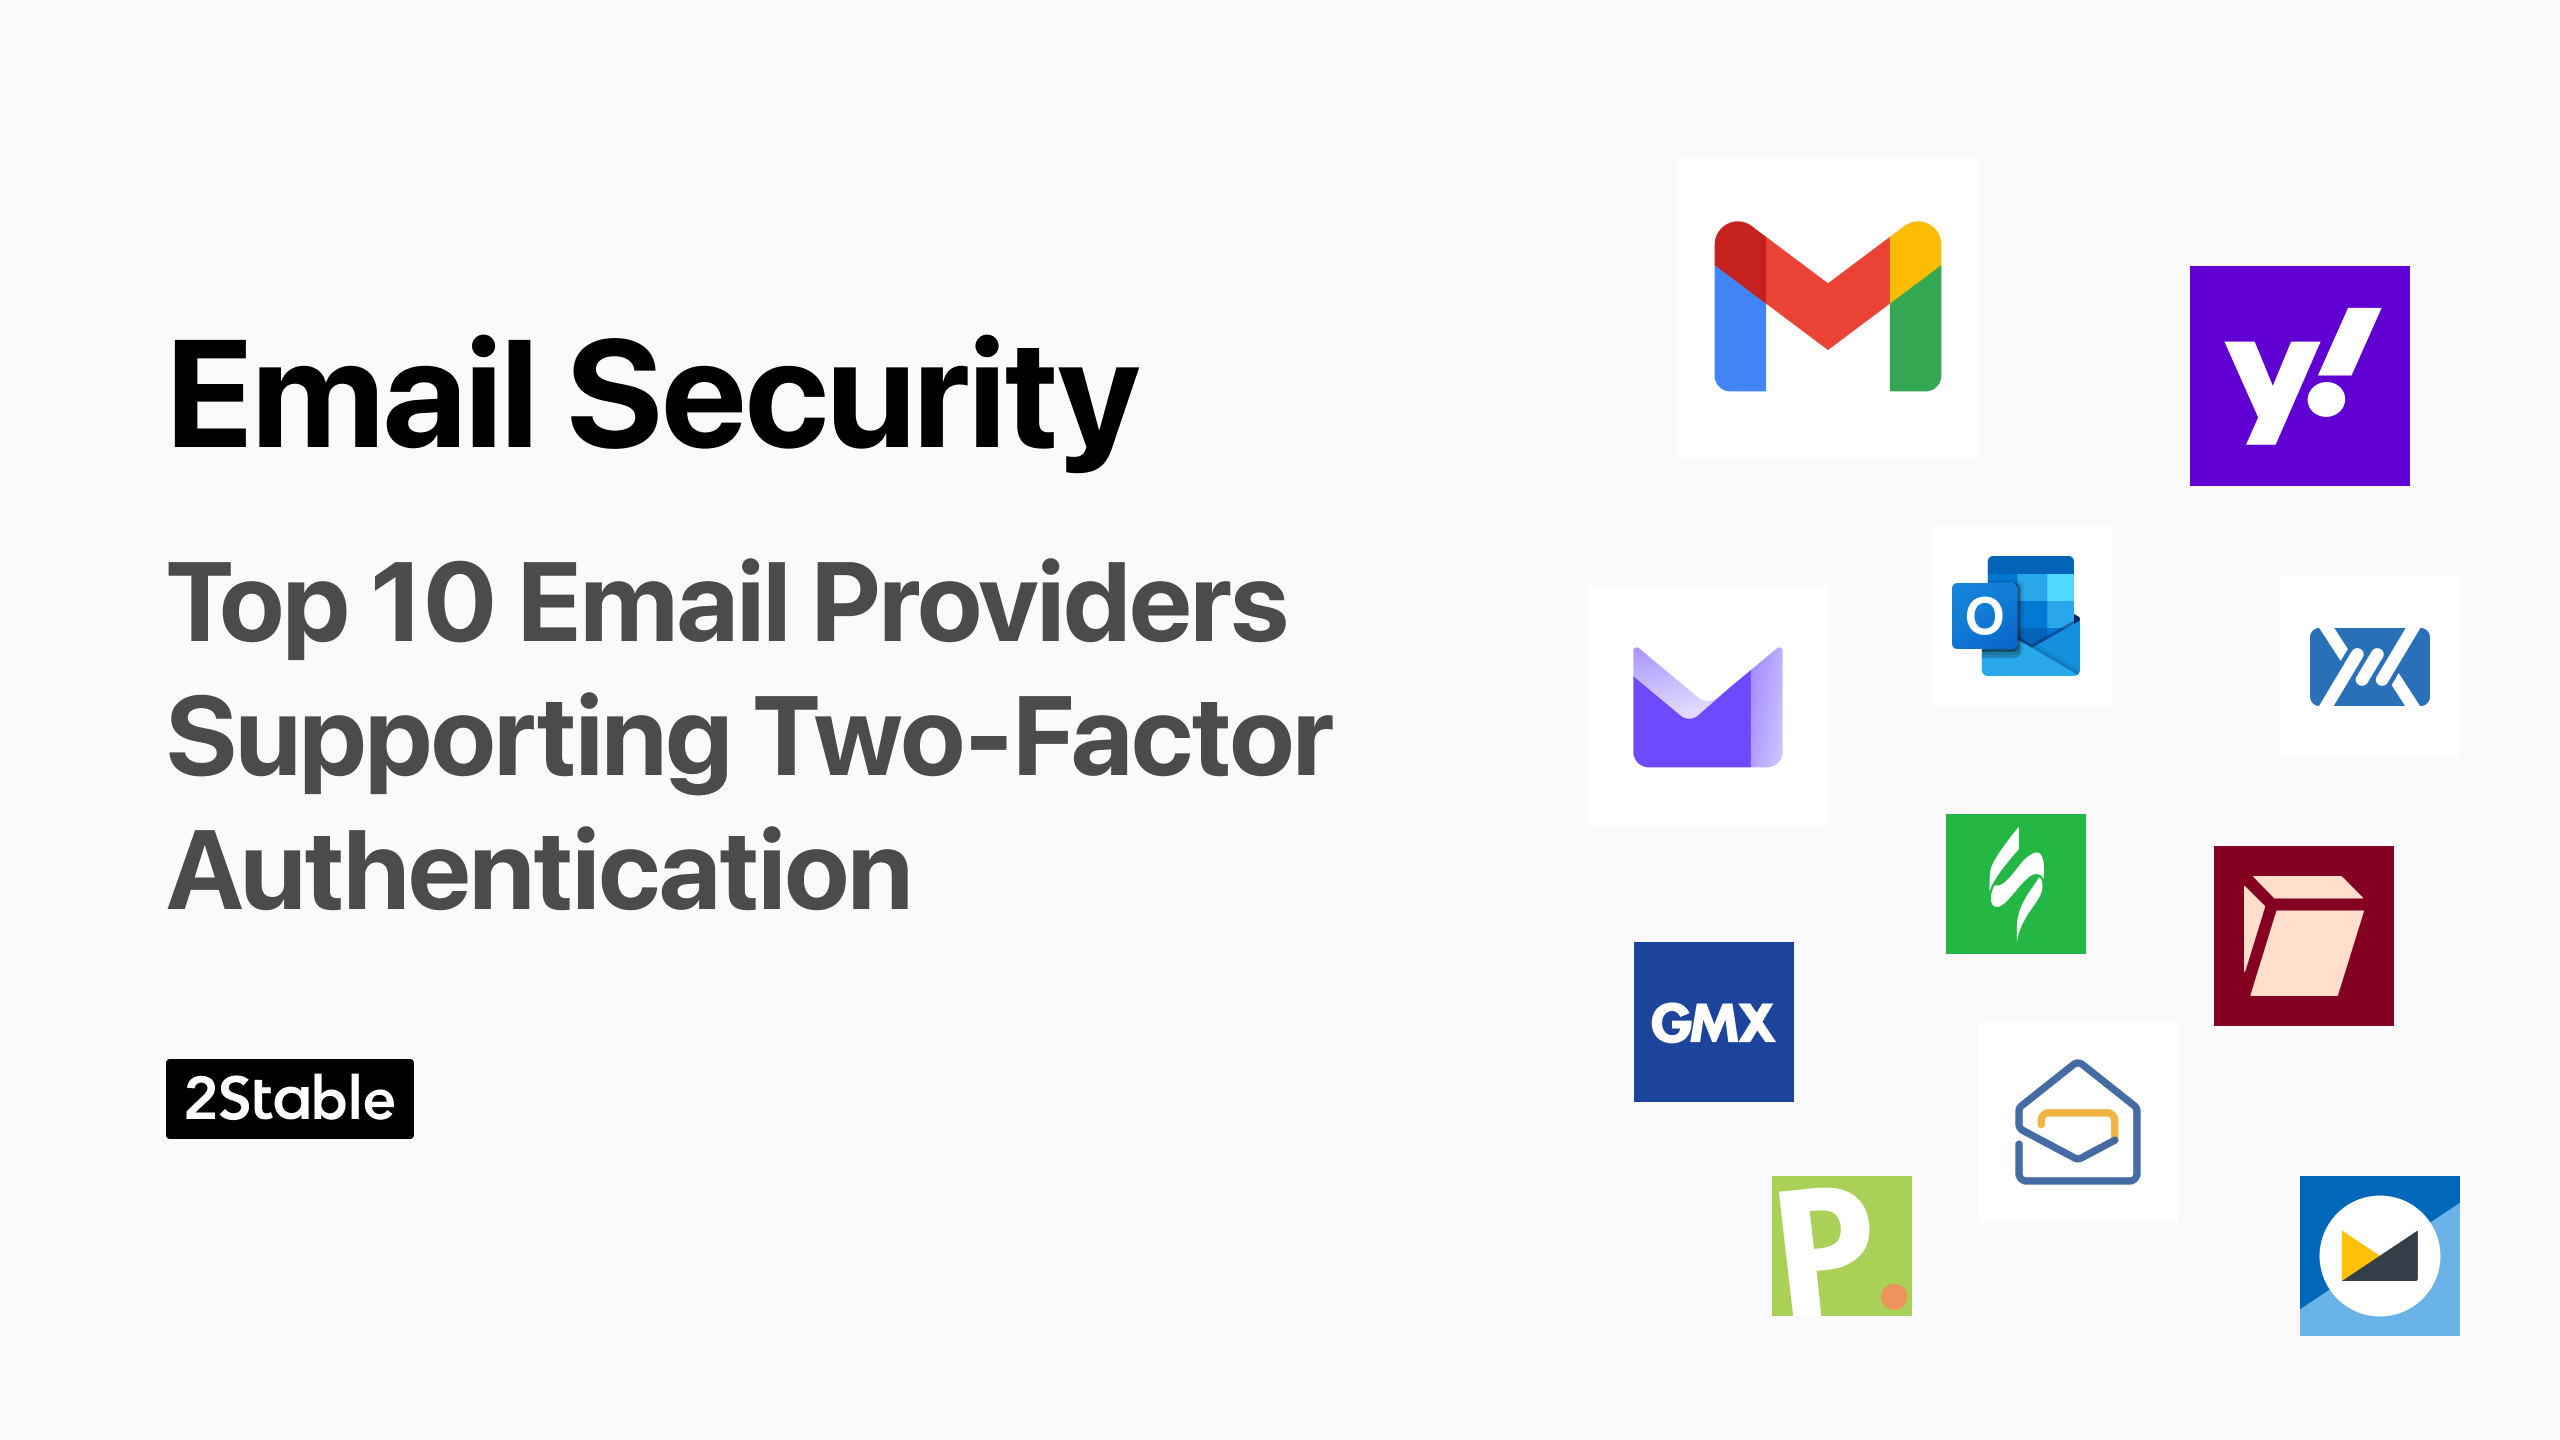 Top 10 Email Providers Supporting Two-Factor Authentication